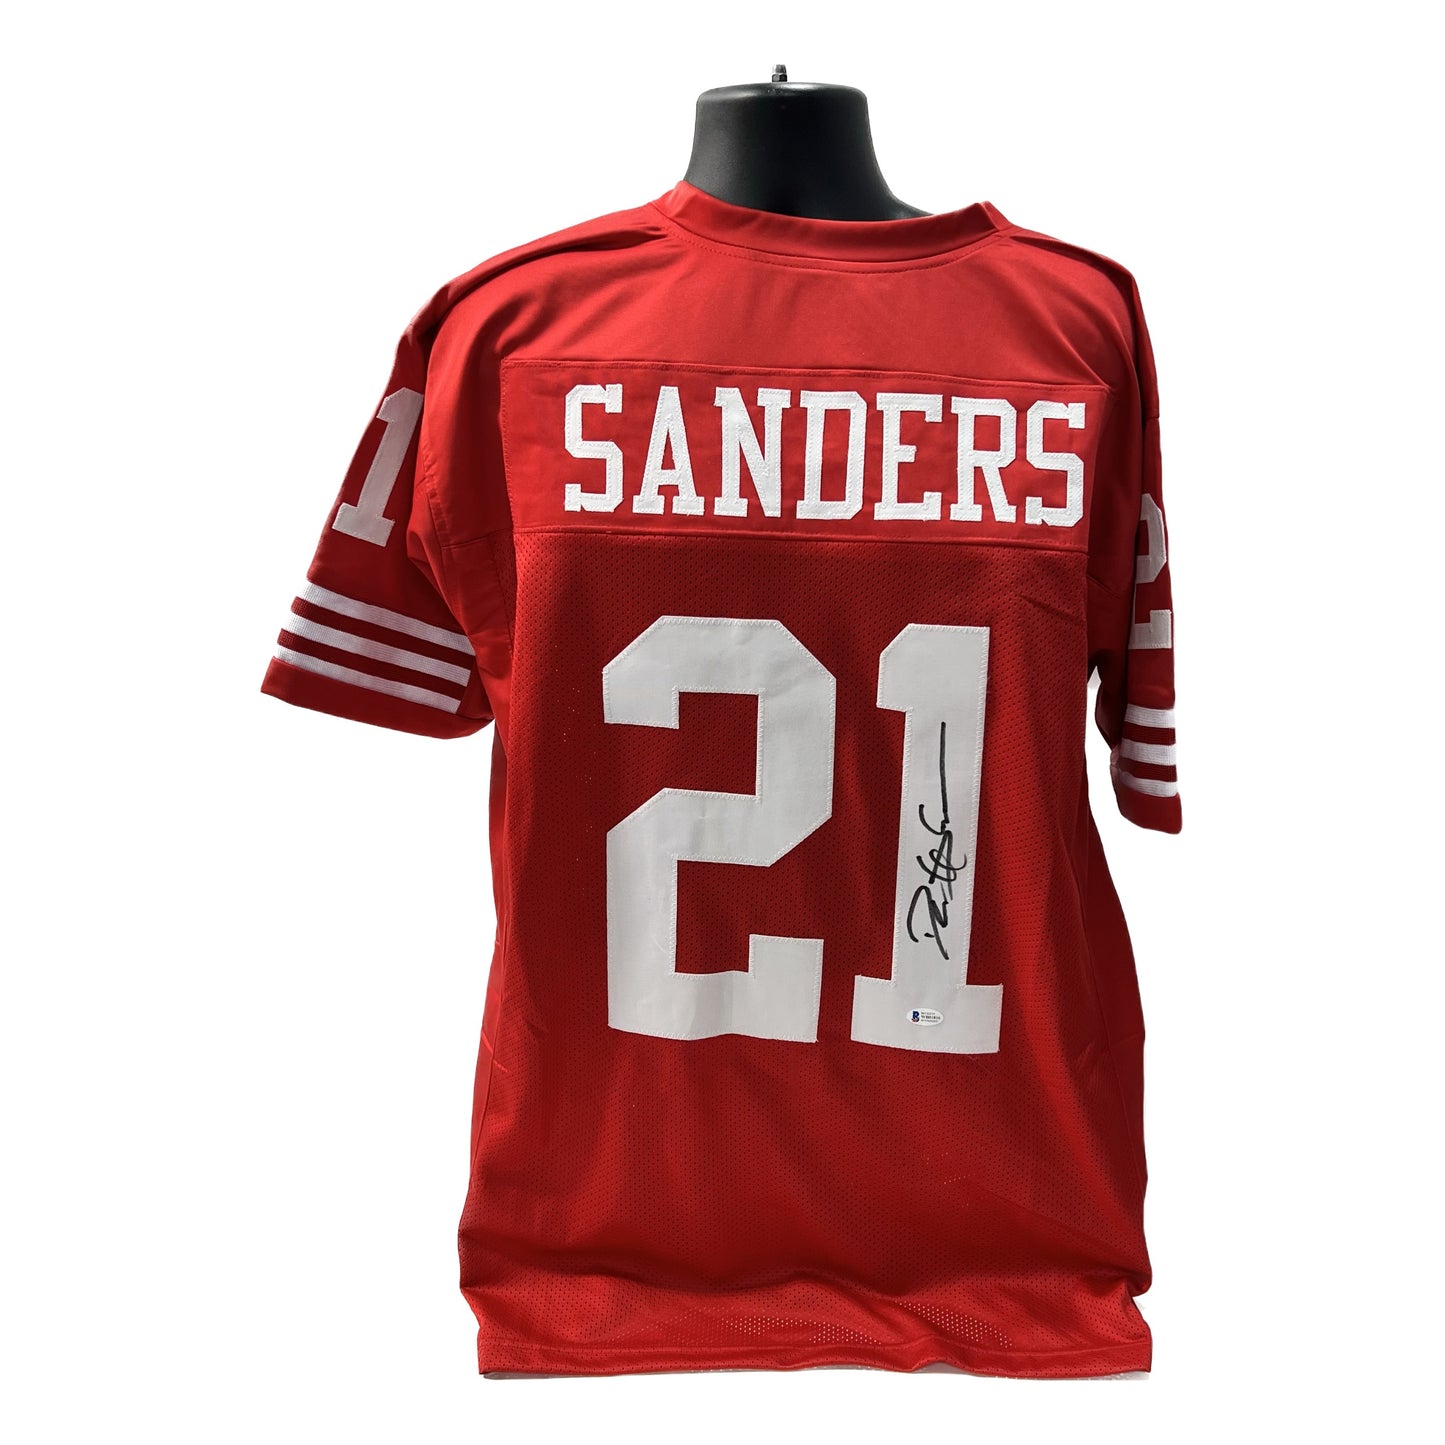 Deion Sanders Autographed Red San Francisco 49ers Jersey Beckett